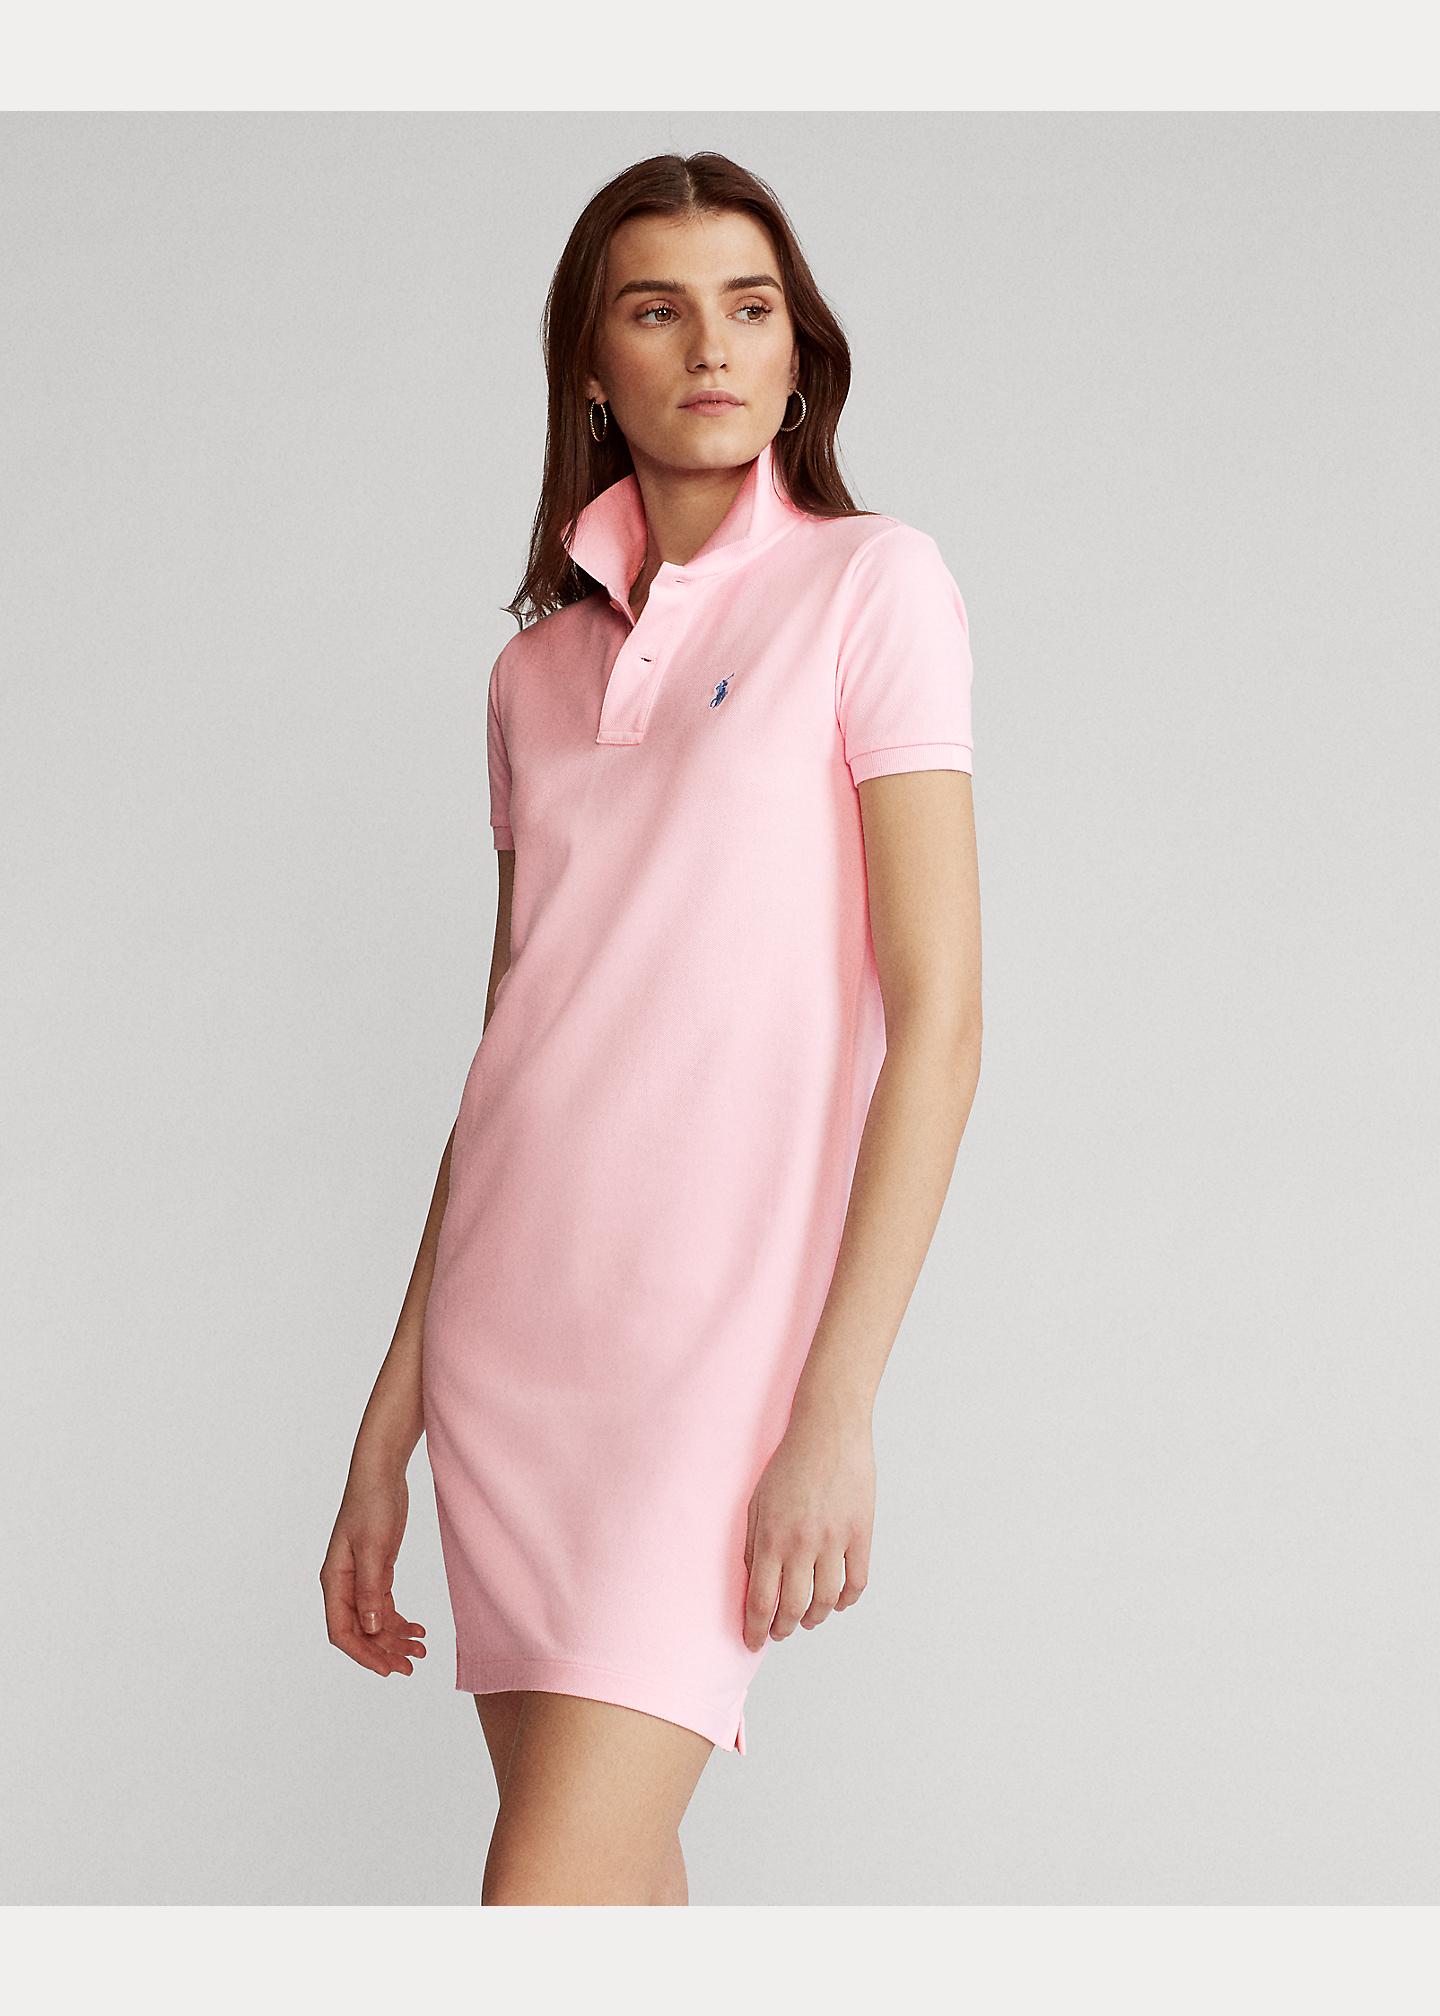 Polo Ralph Lauren Cotton Mesh Polo Dress in Pink | Lyst UK